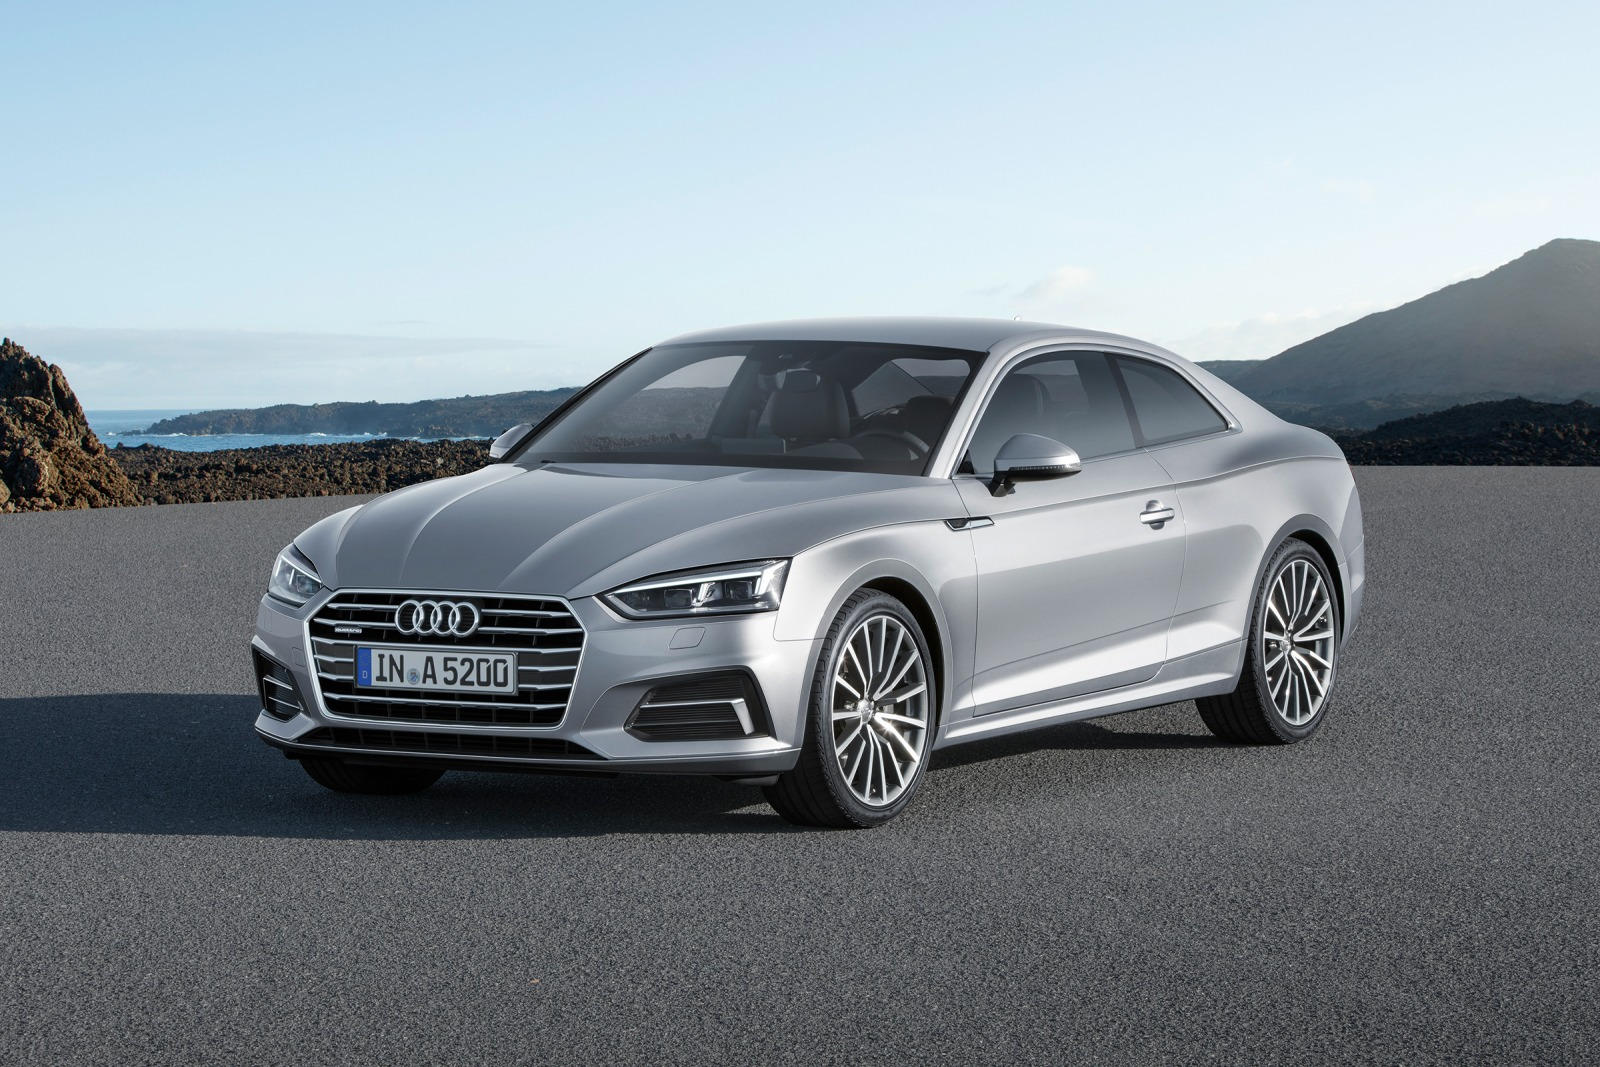 Audi A5 Sportback (2012 - 2015) used car review, Car review